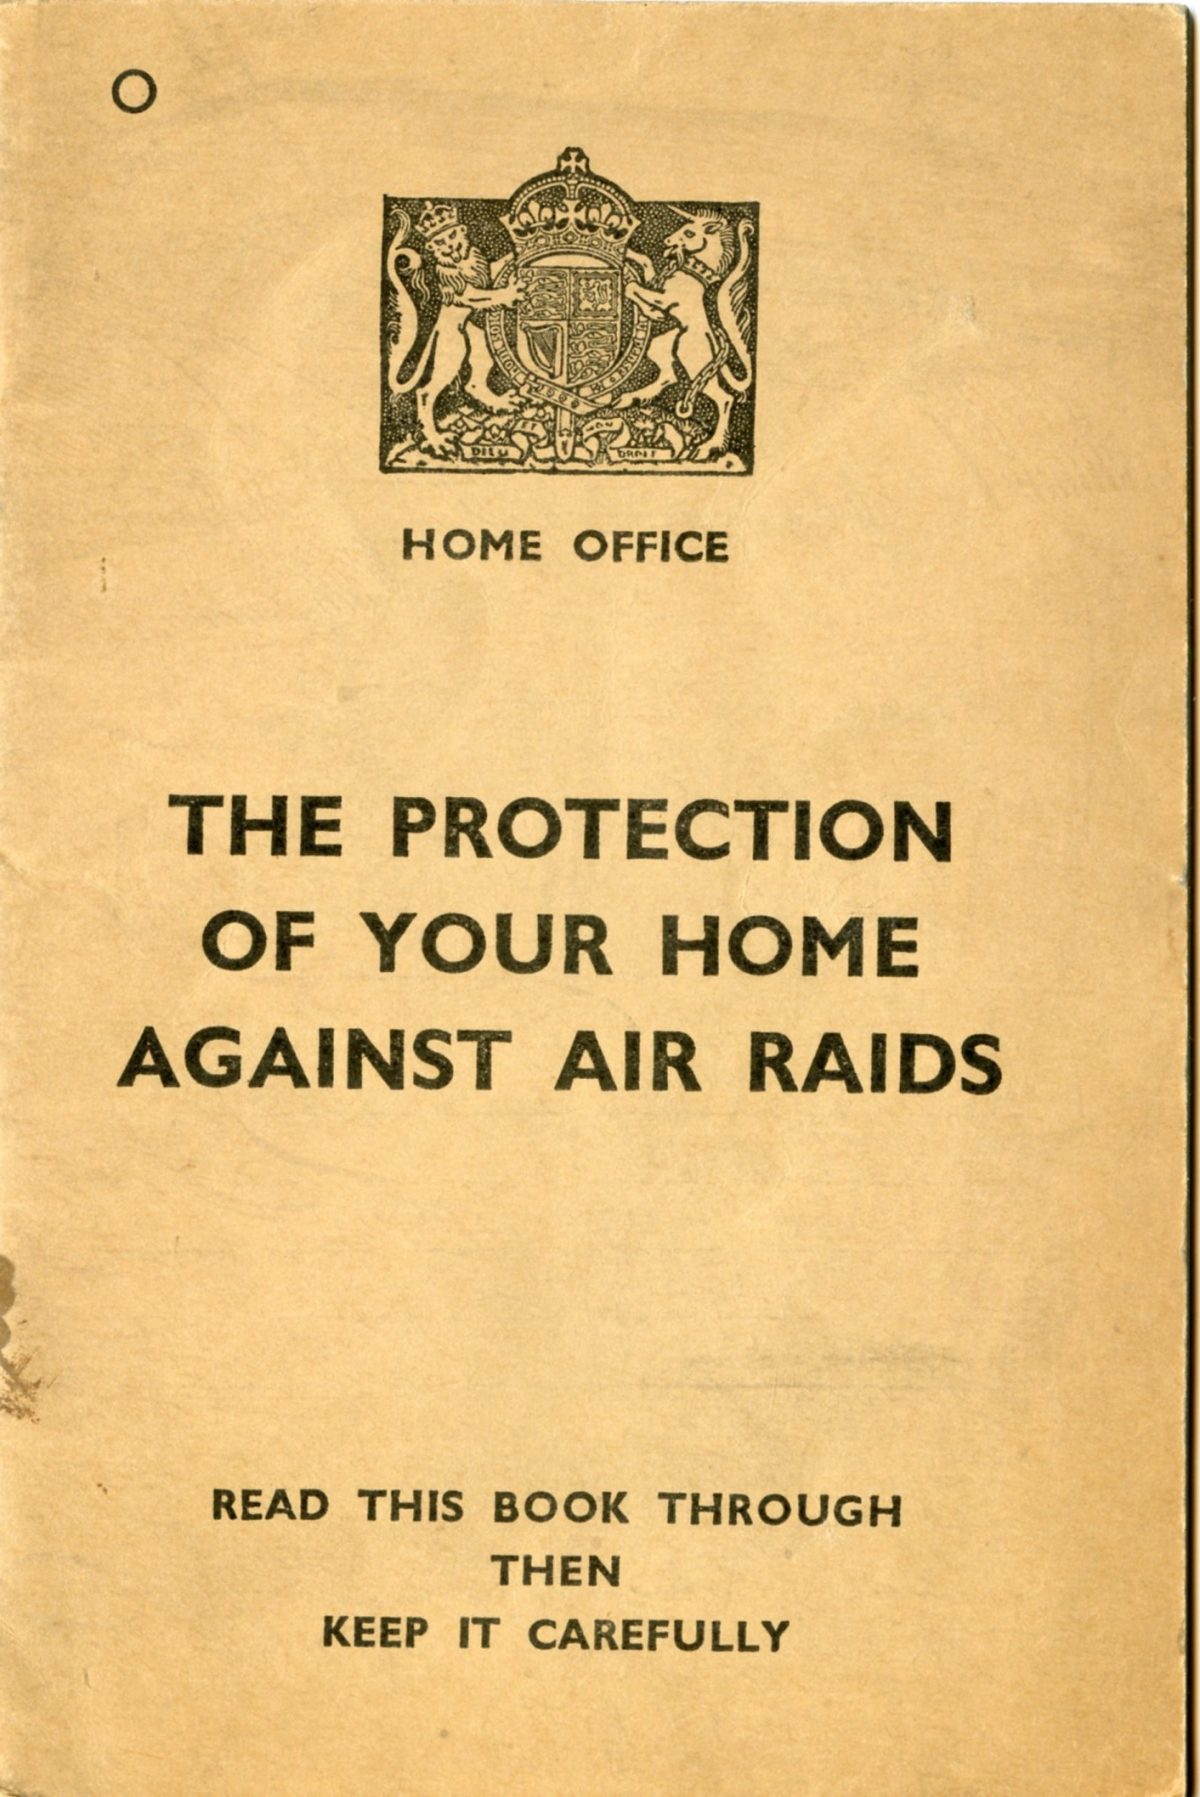 The Protection of your Home against Air Raids